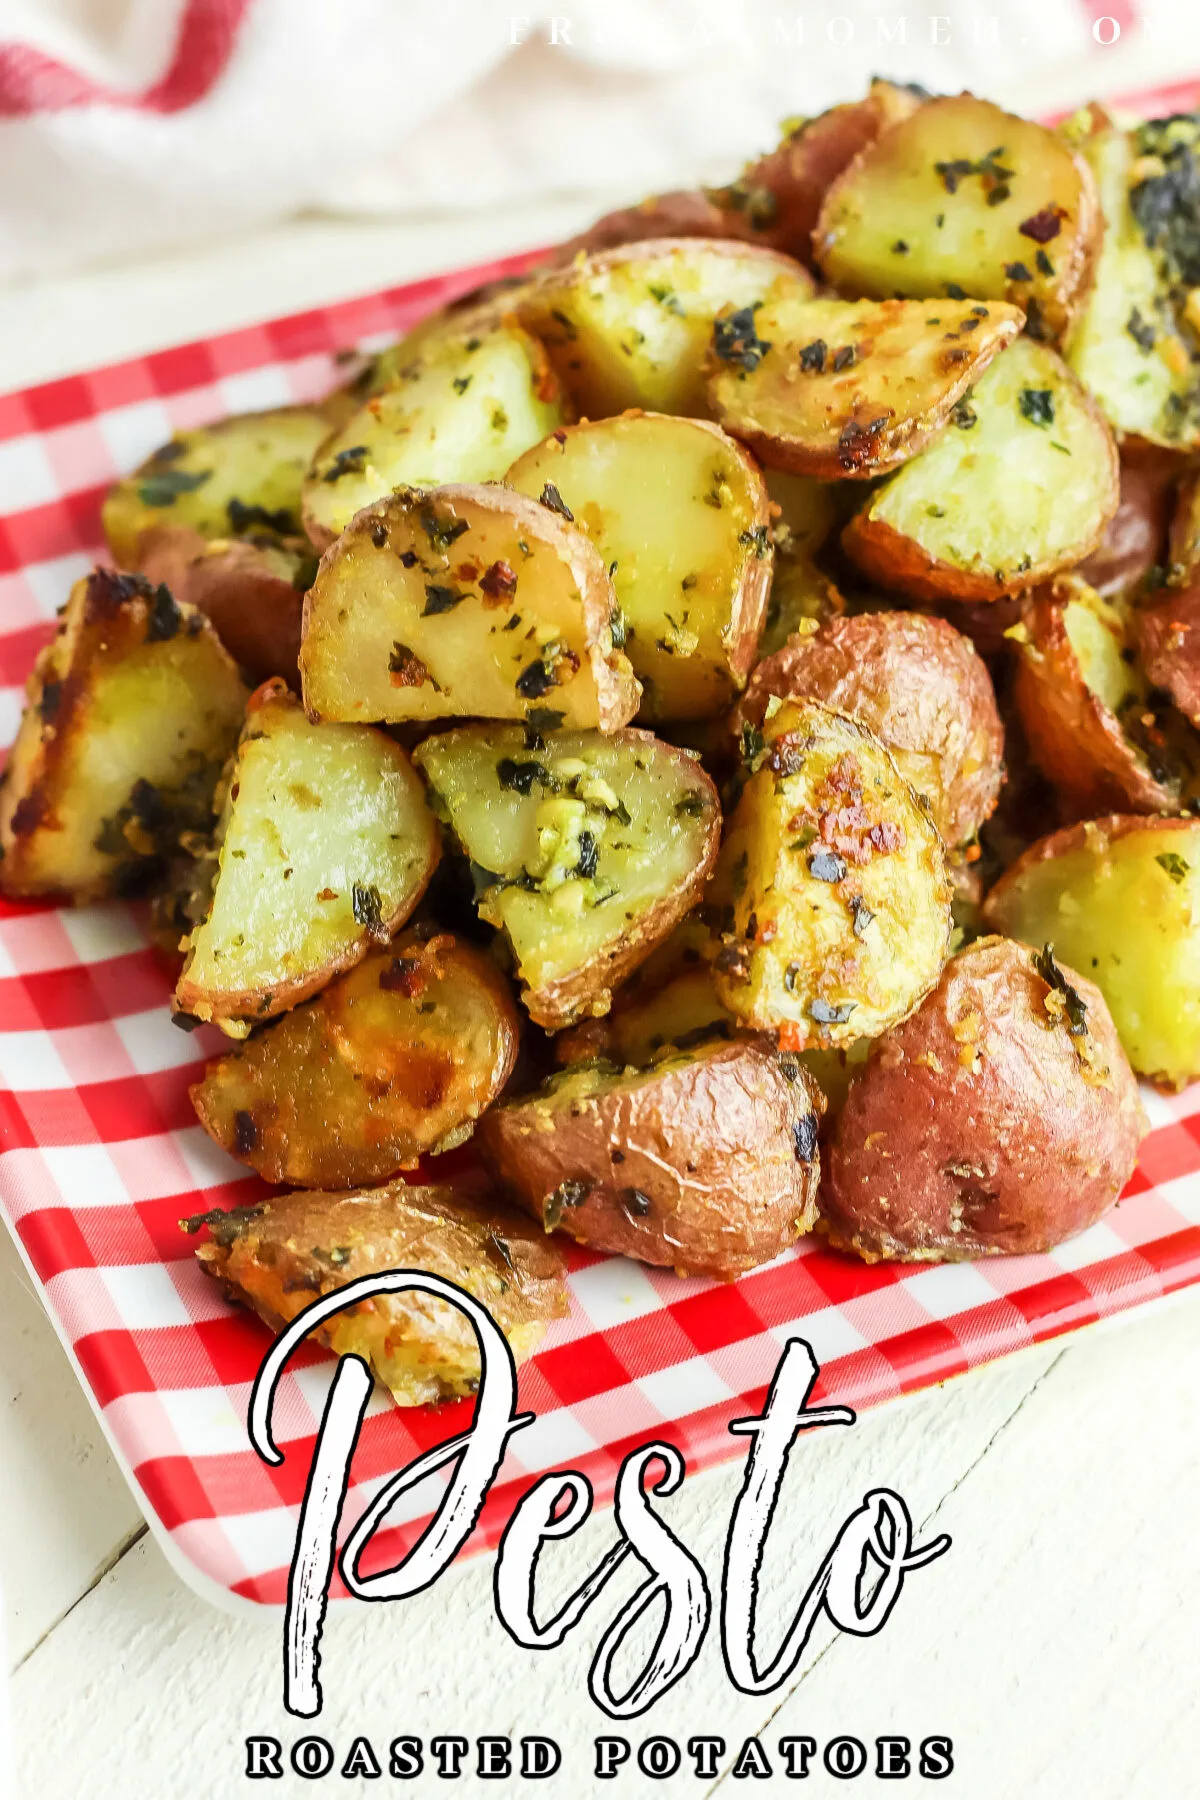 These Pesto Roasted Potatoes are such a classic side dish that goes well with a variety of proteins! Tender potatoes, coated with flavourful pesto and roasted to crispy perfection.